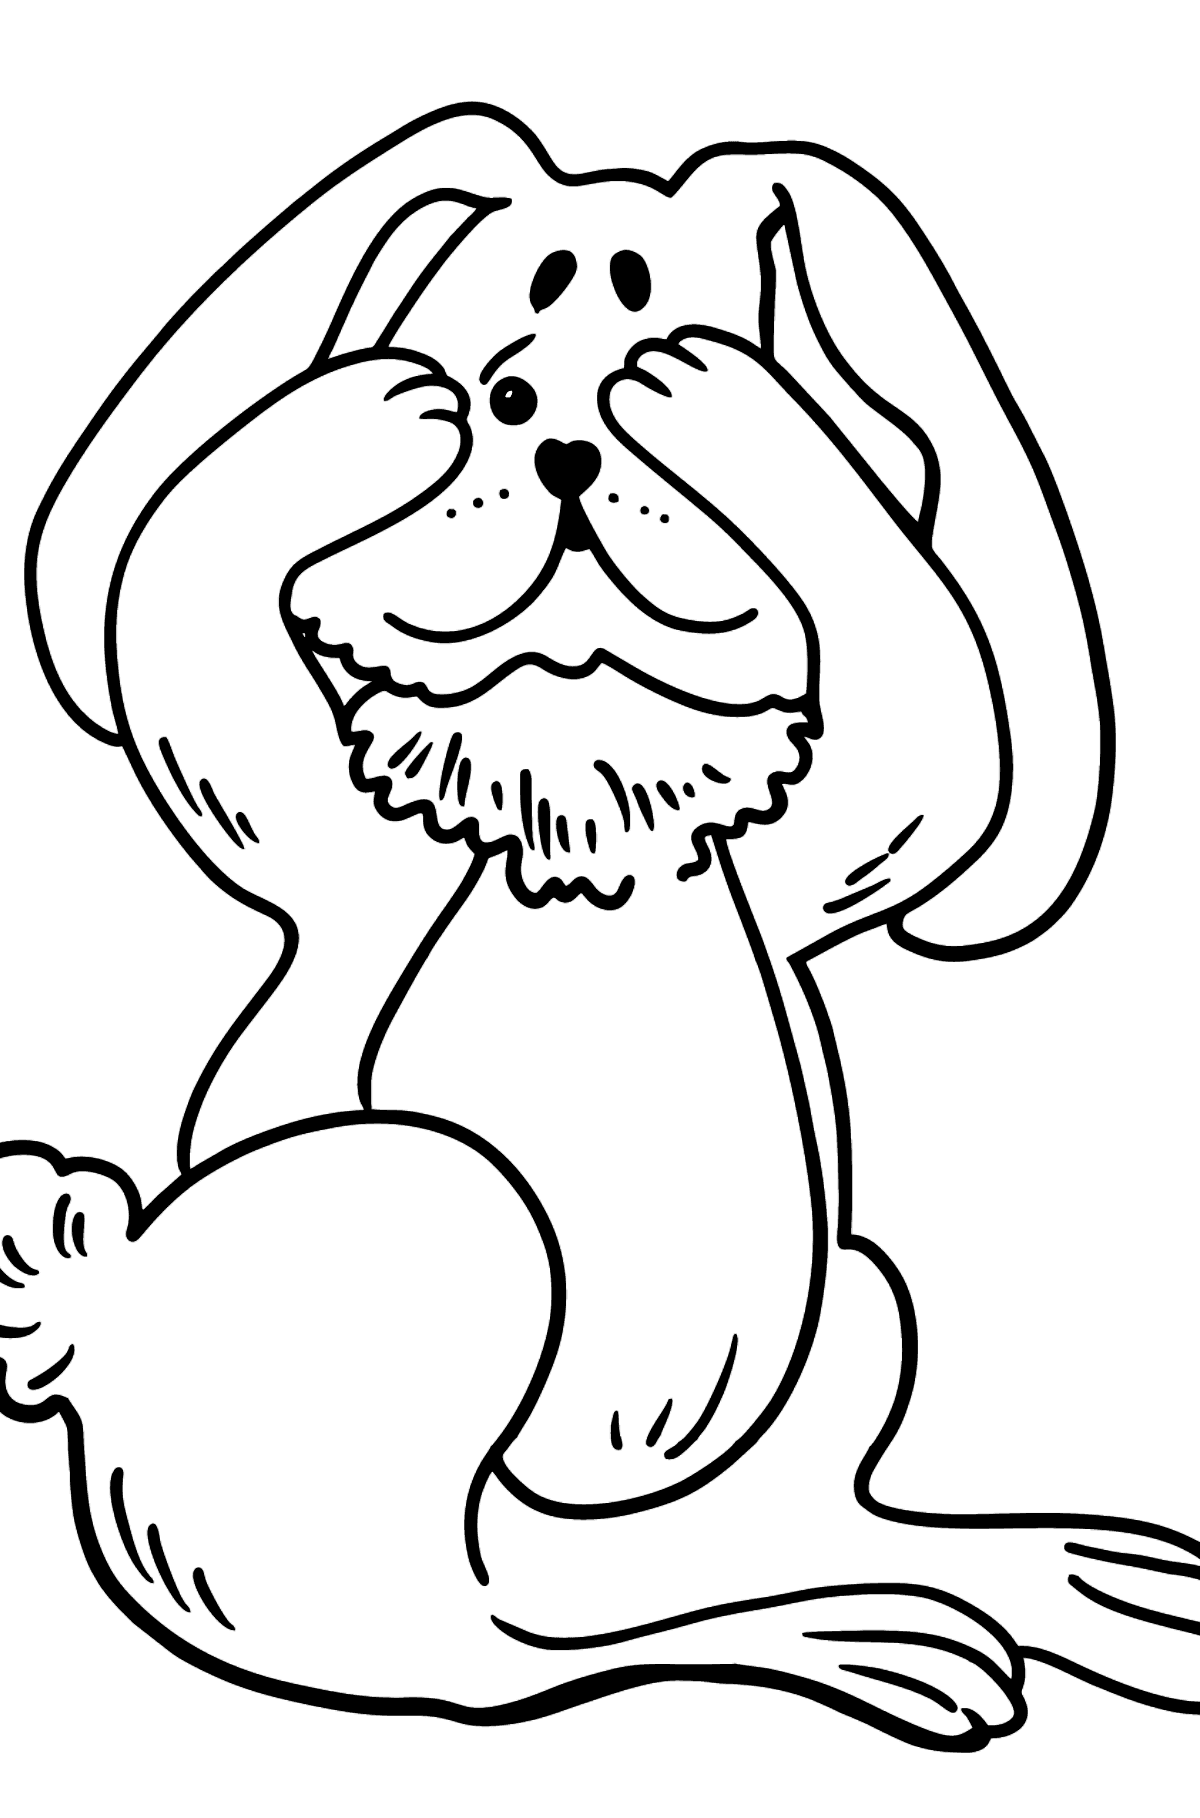 Scared Bunny coloring page - Coloring Pages for Kids